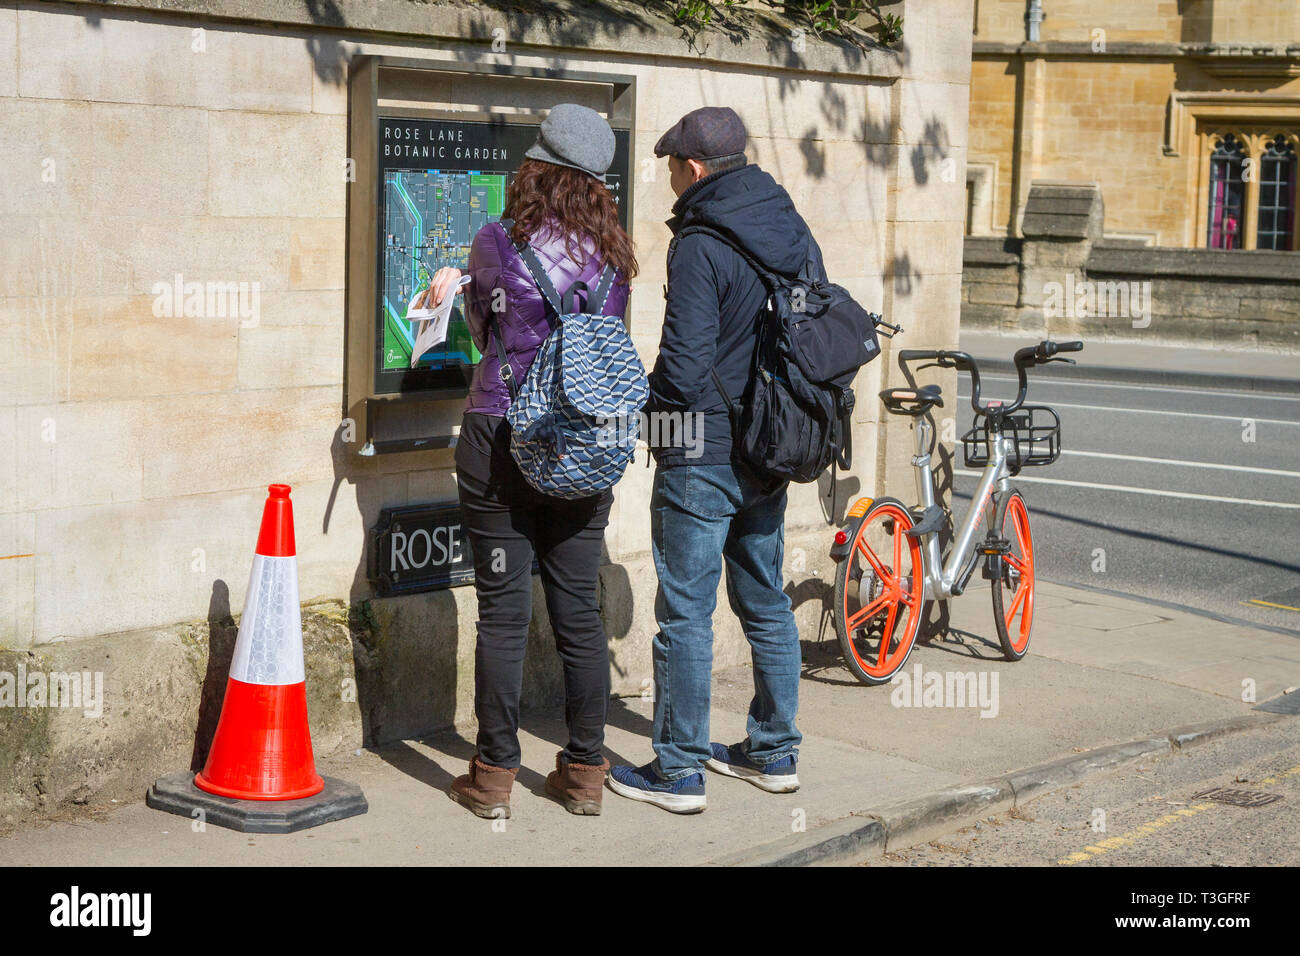 Tourists check the map in Rose Lane by the Botanic Garden, Oxford Stock Photo